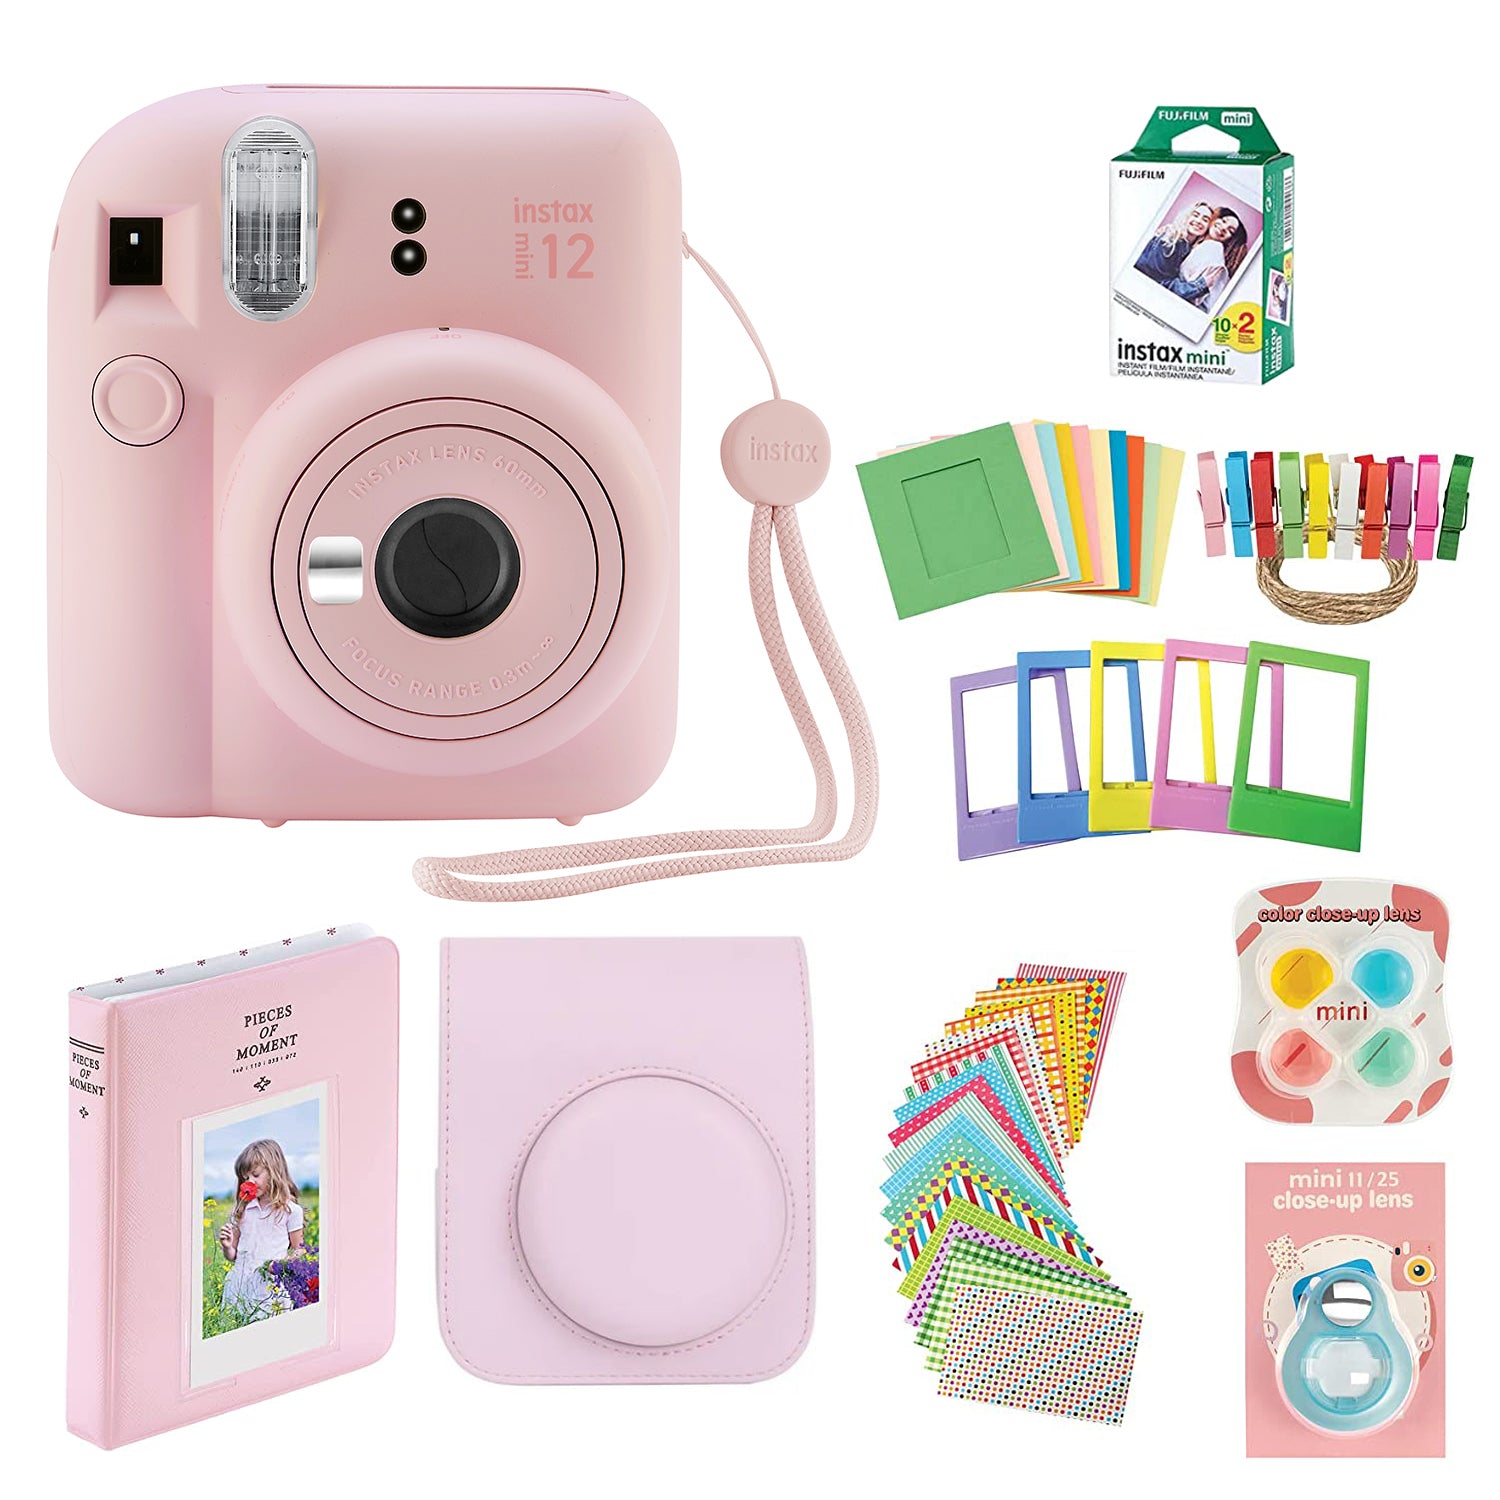 Fujifilm Instax Mini 12 Instant Camera with Case, 20 Fuji Films, Decoration Stickers, Frames, Photo Album and More Accessory kit (Blossom Pink)